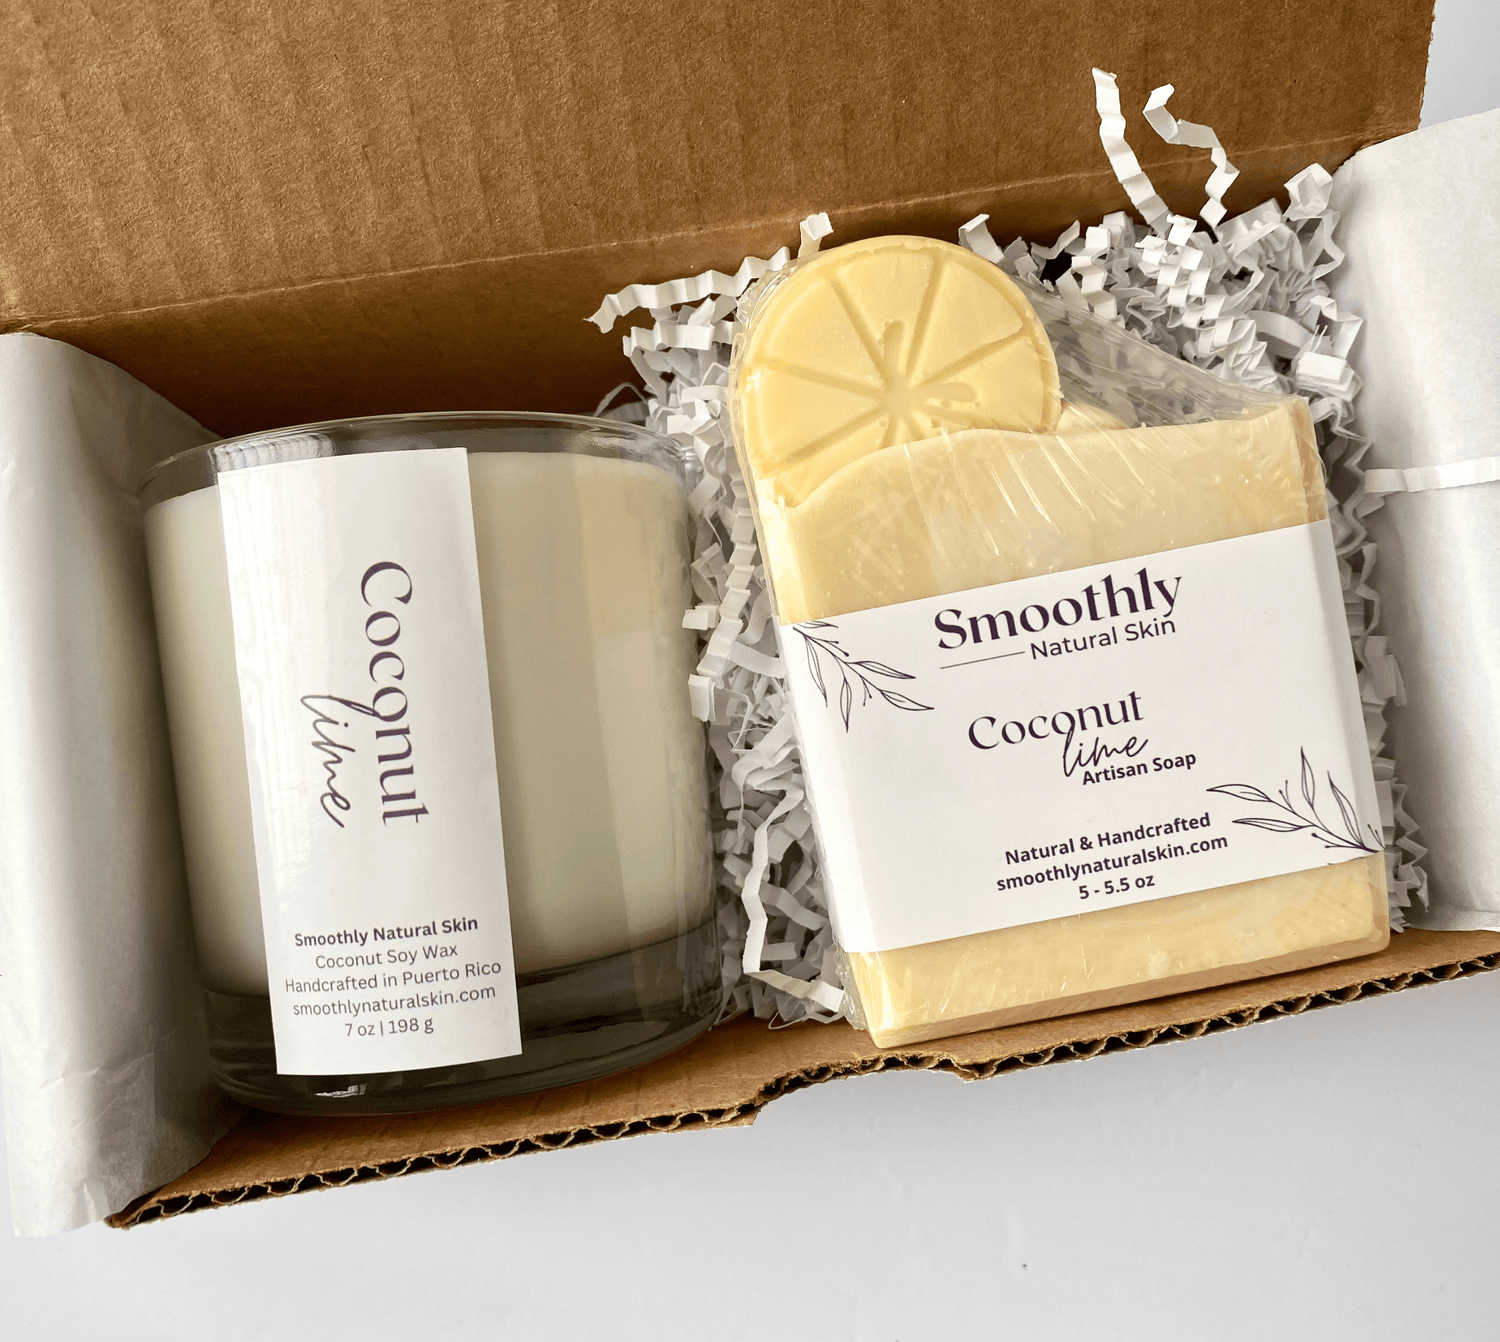 Coconut lime soap and candle set is a best seller. Is a fresh fragrance; it has notes of lime, grapefruit, lemon with a floral undertone of jasmine, on a background of musk and sandalwood.